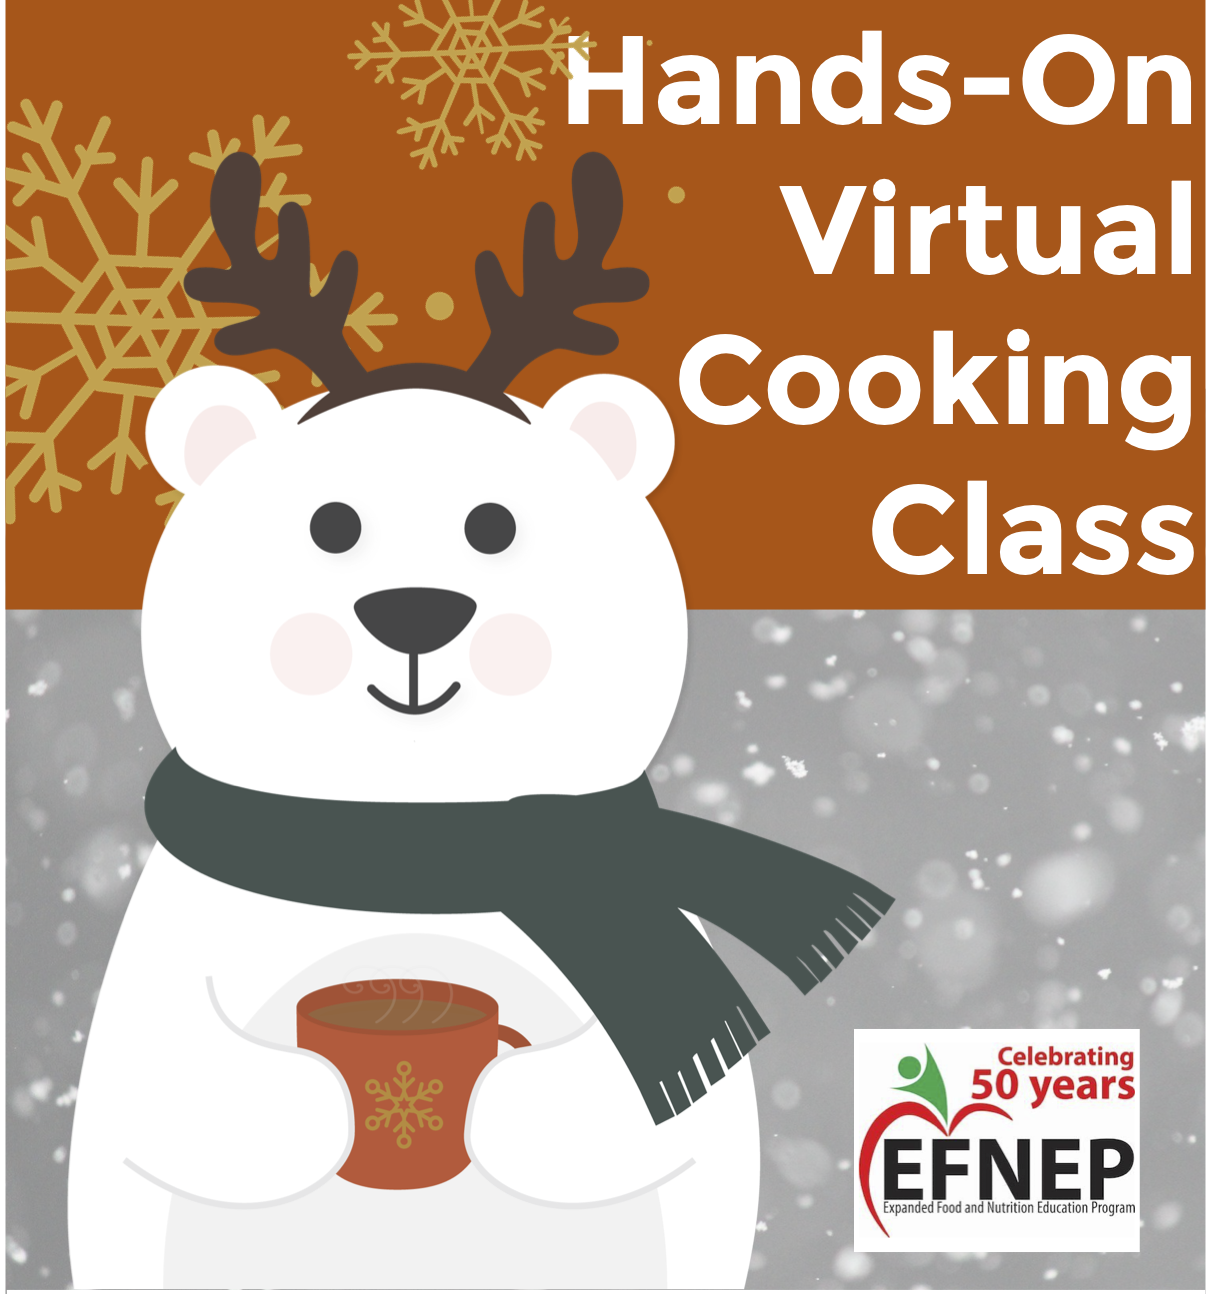 Hands On Virtual Cooking Class. Polar Bear wearing antlers holding a mug